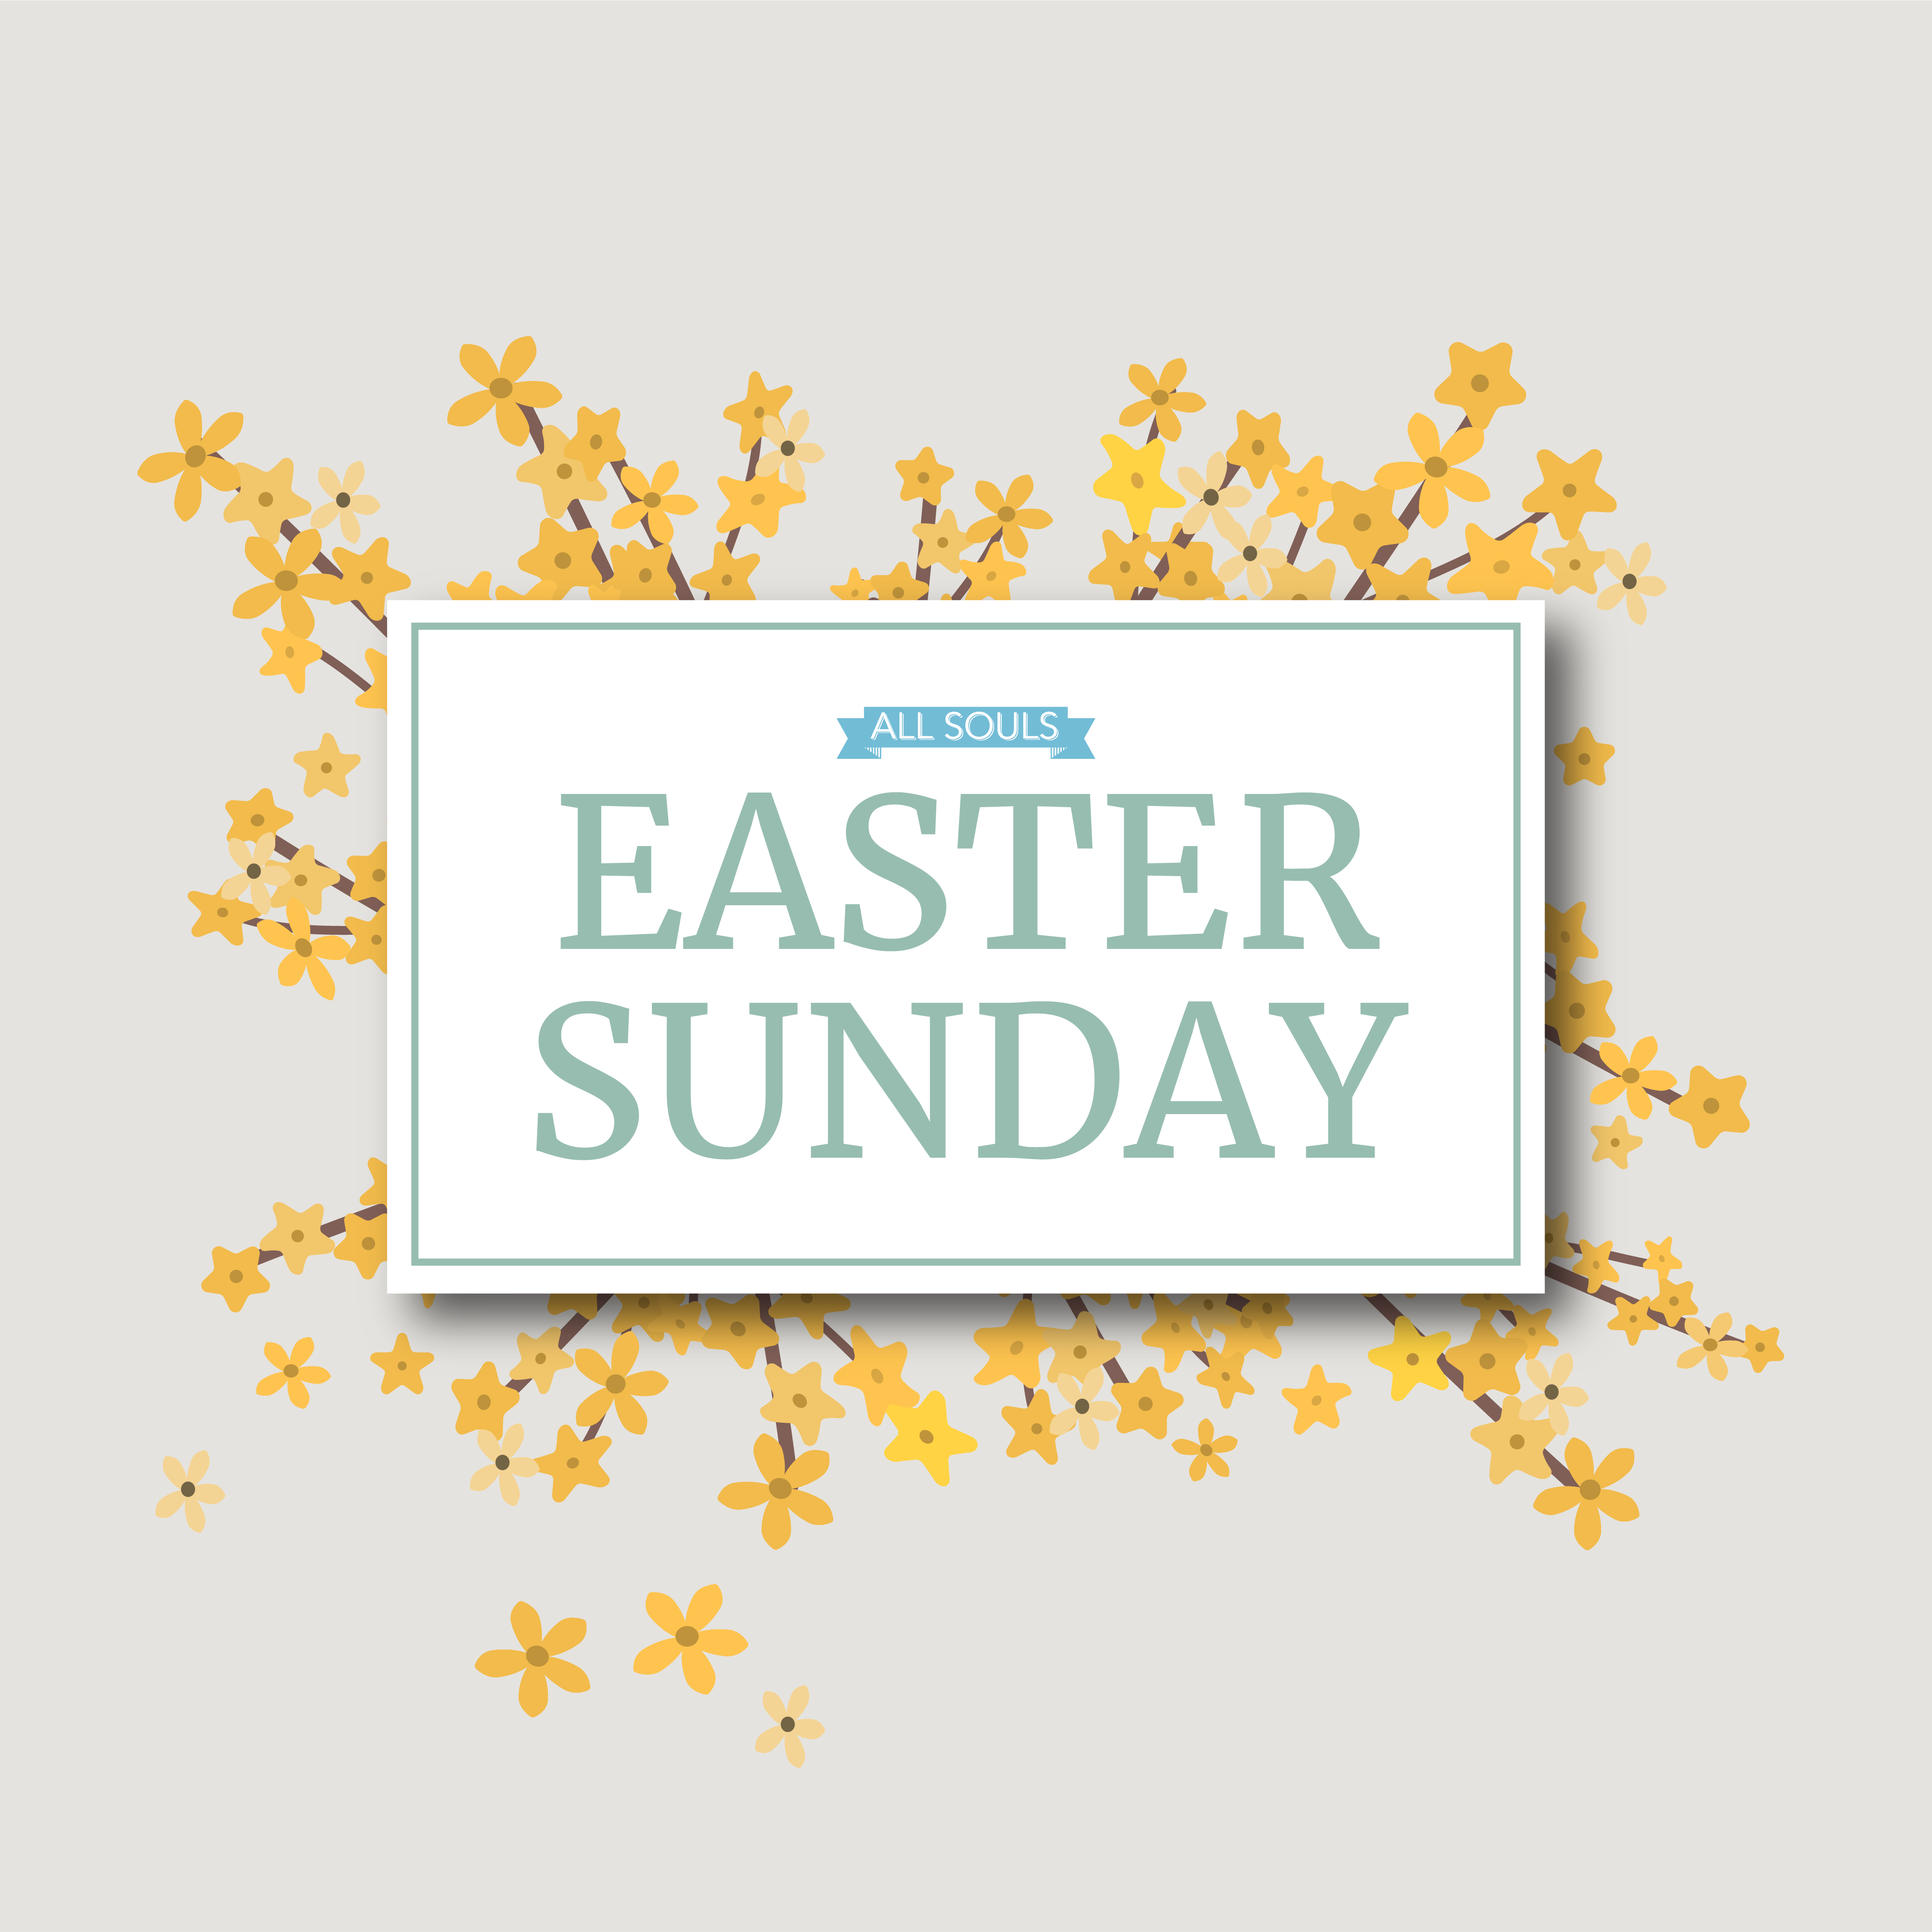 The words Easter Sunday with yellow flowers behind it